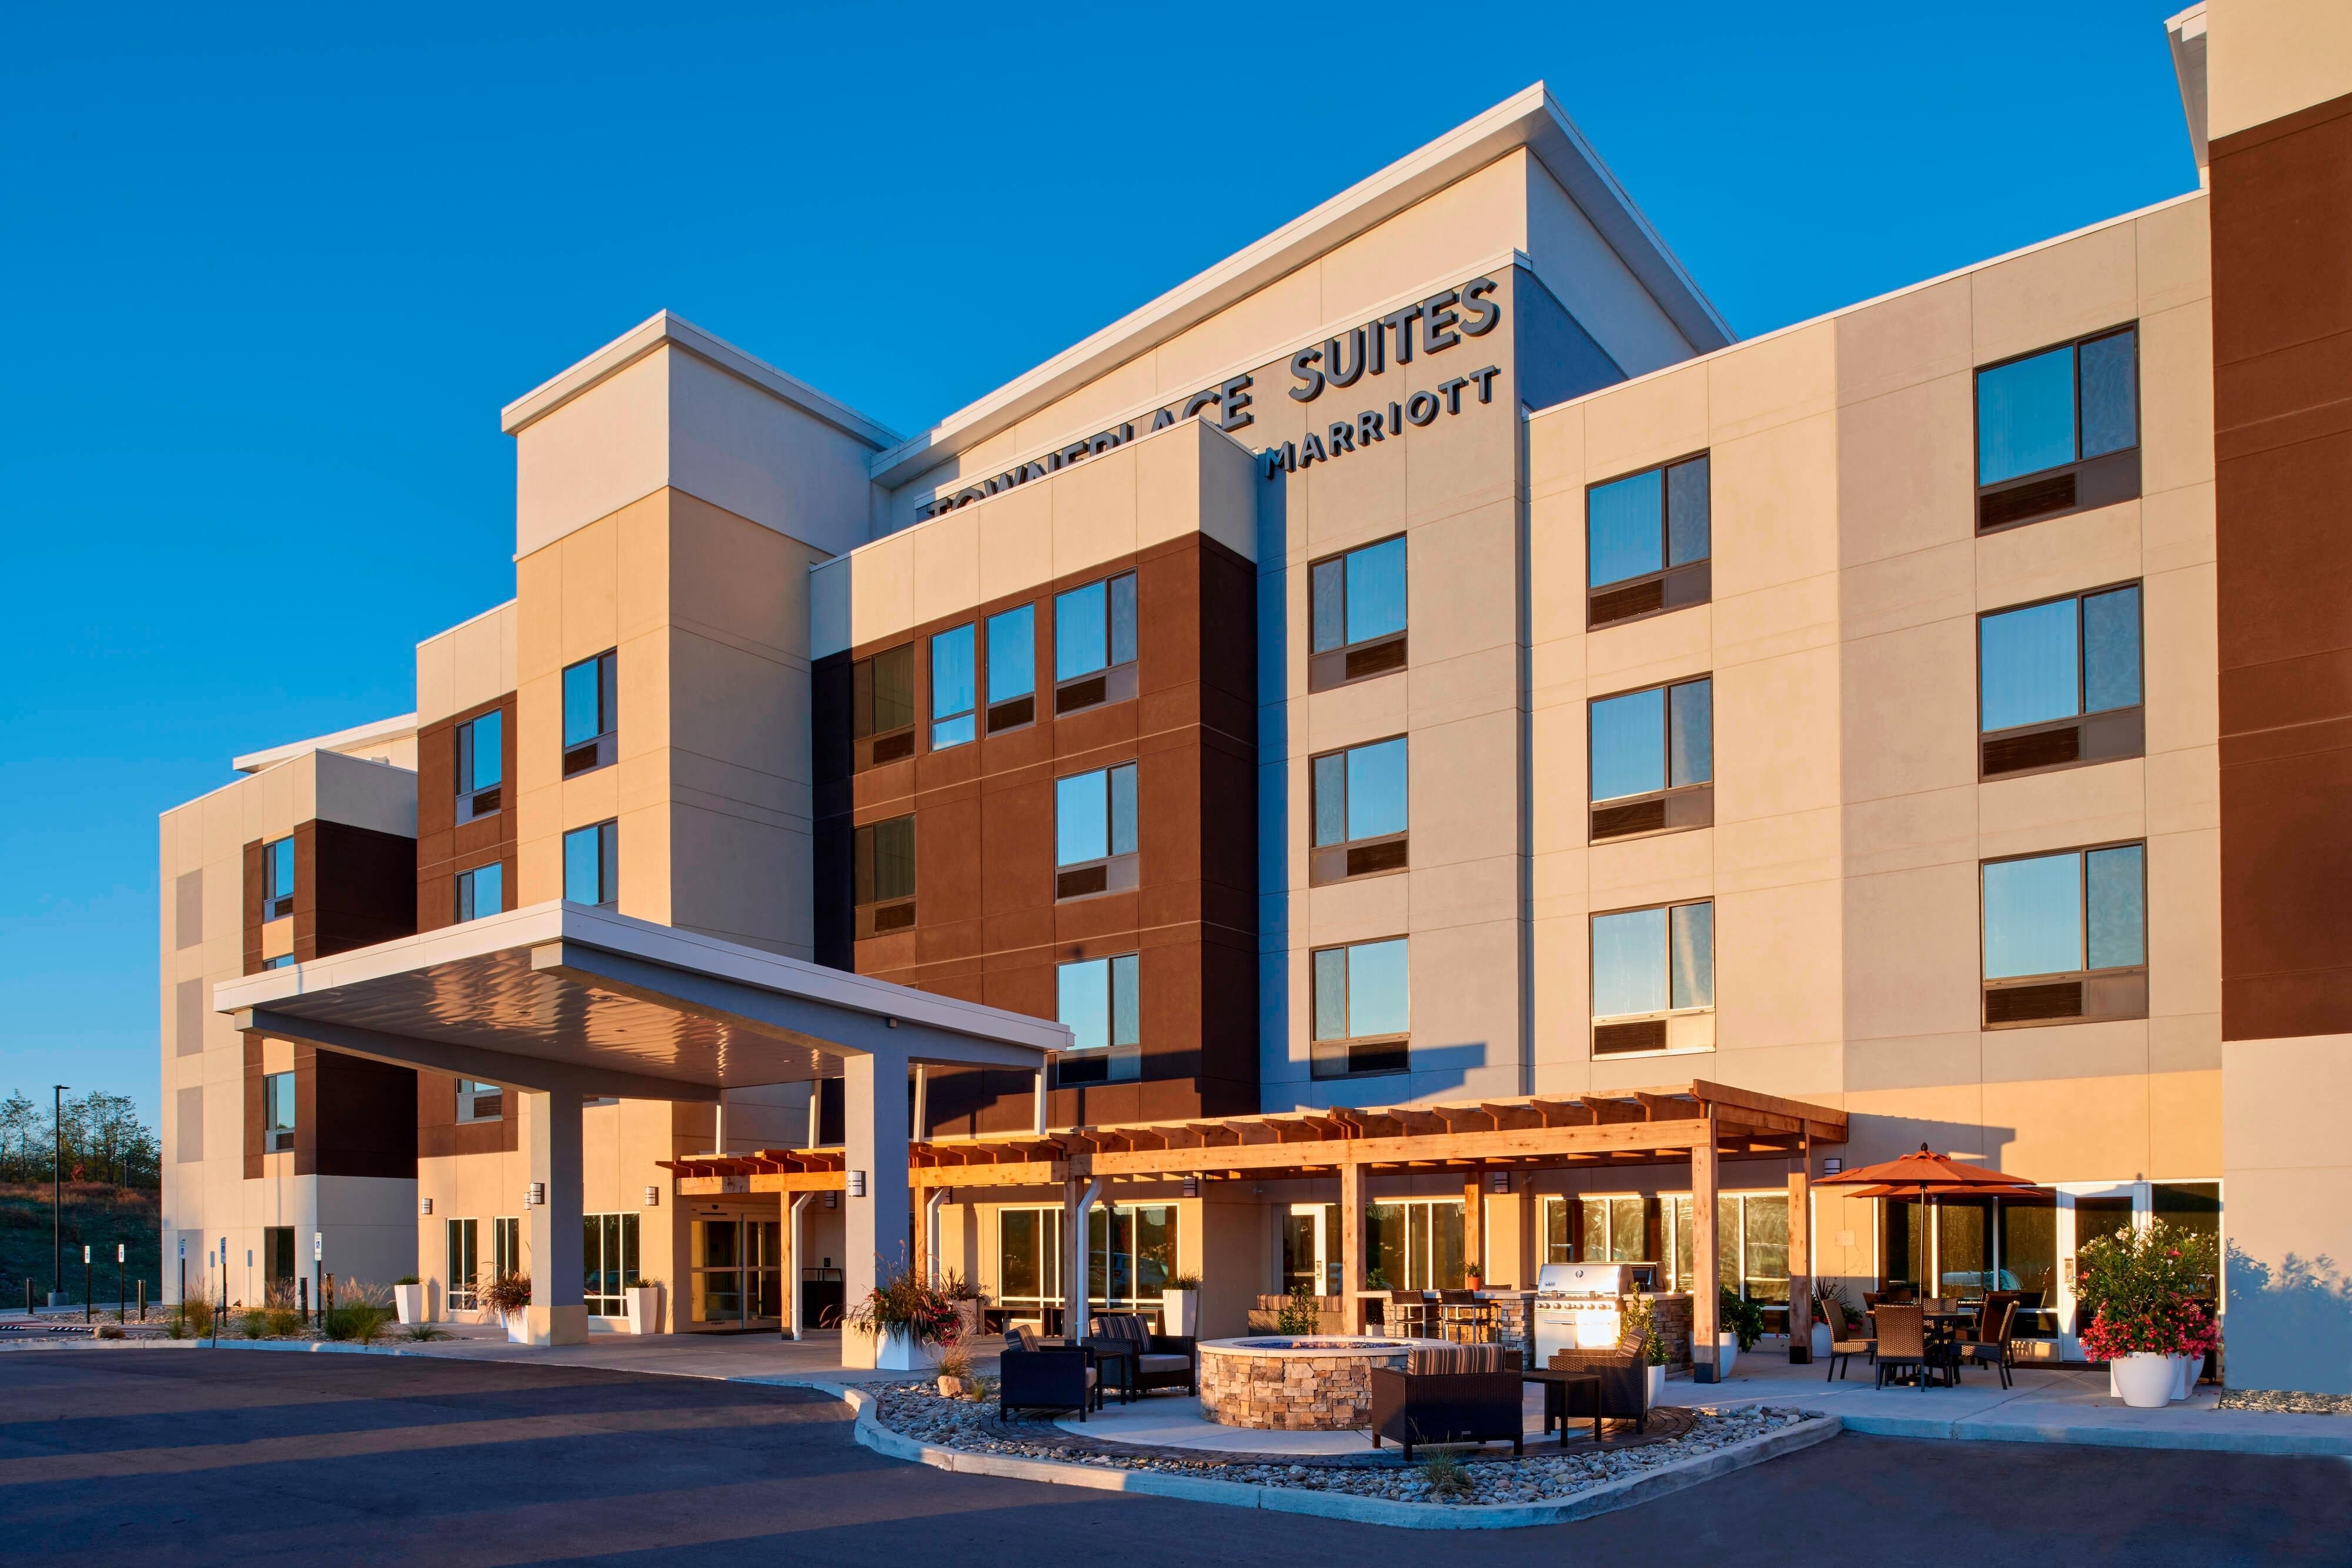 TownePlace Suites by Marriott Richmond image